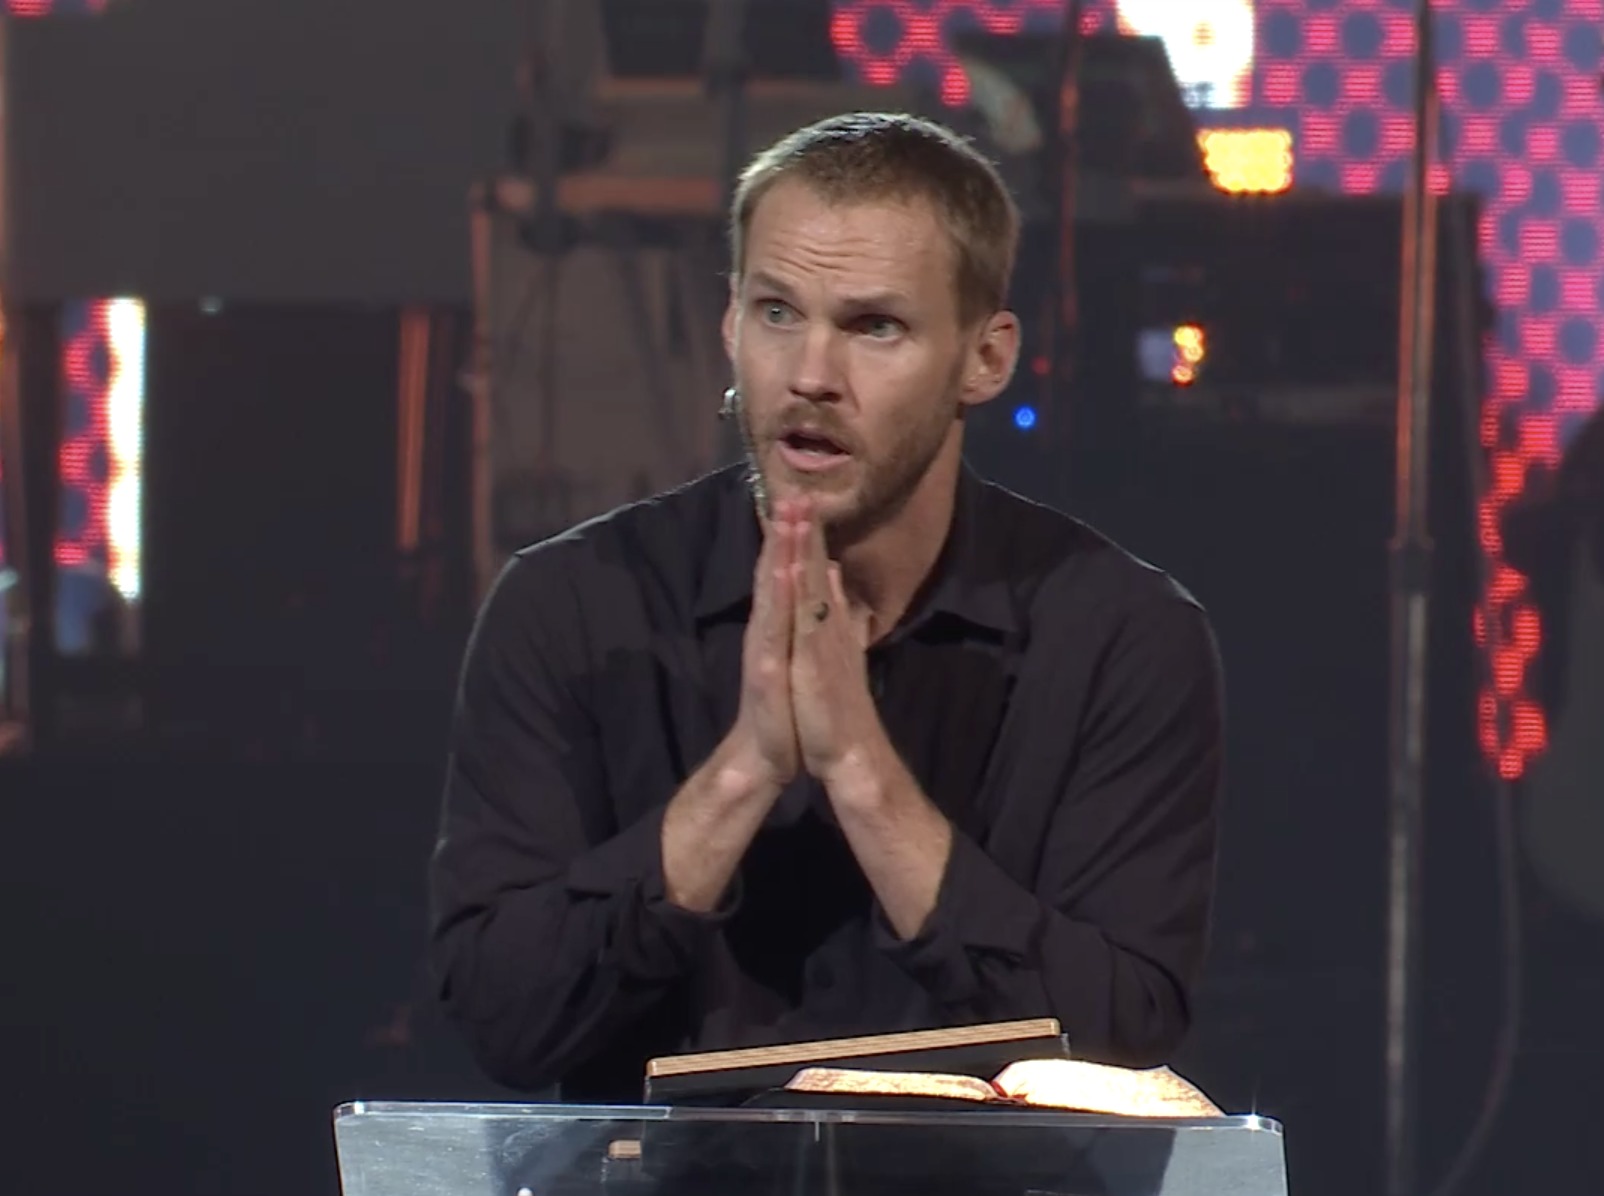 David Platt urges young Christians to avoid 'comfortable' Christianity: 'You will waste your life'